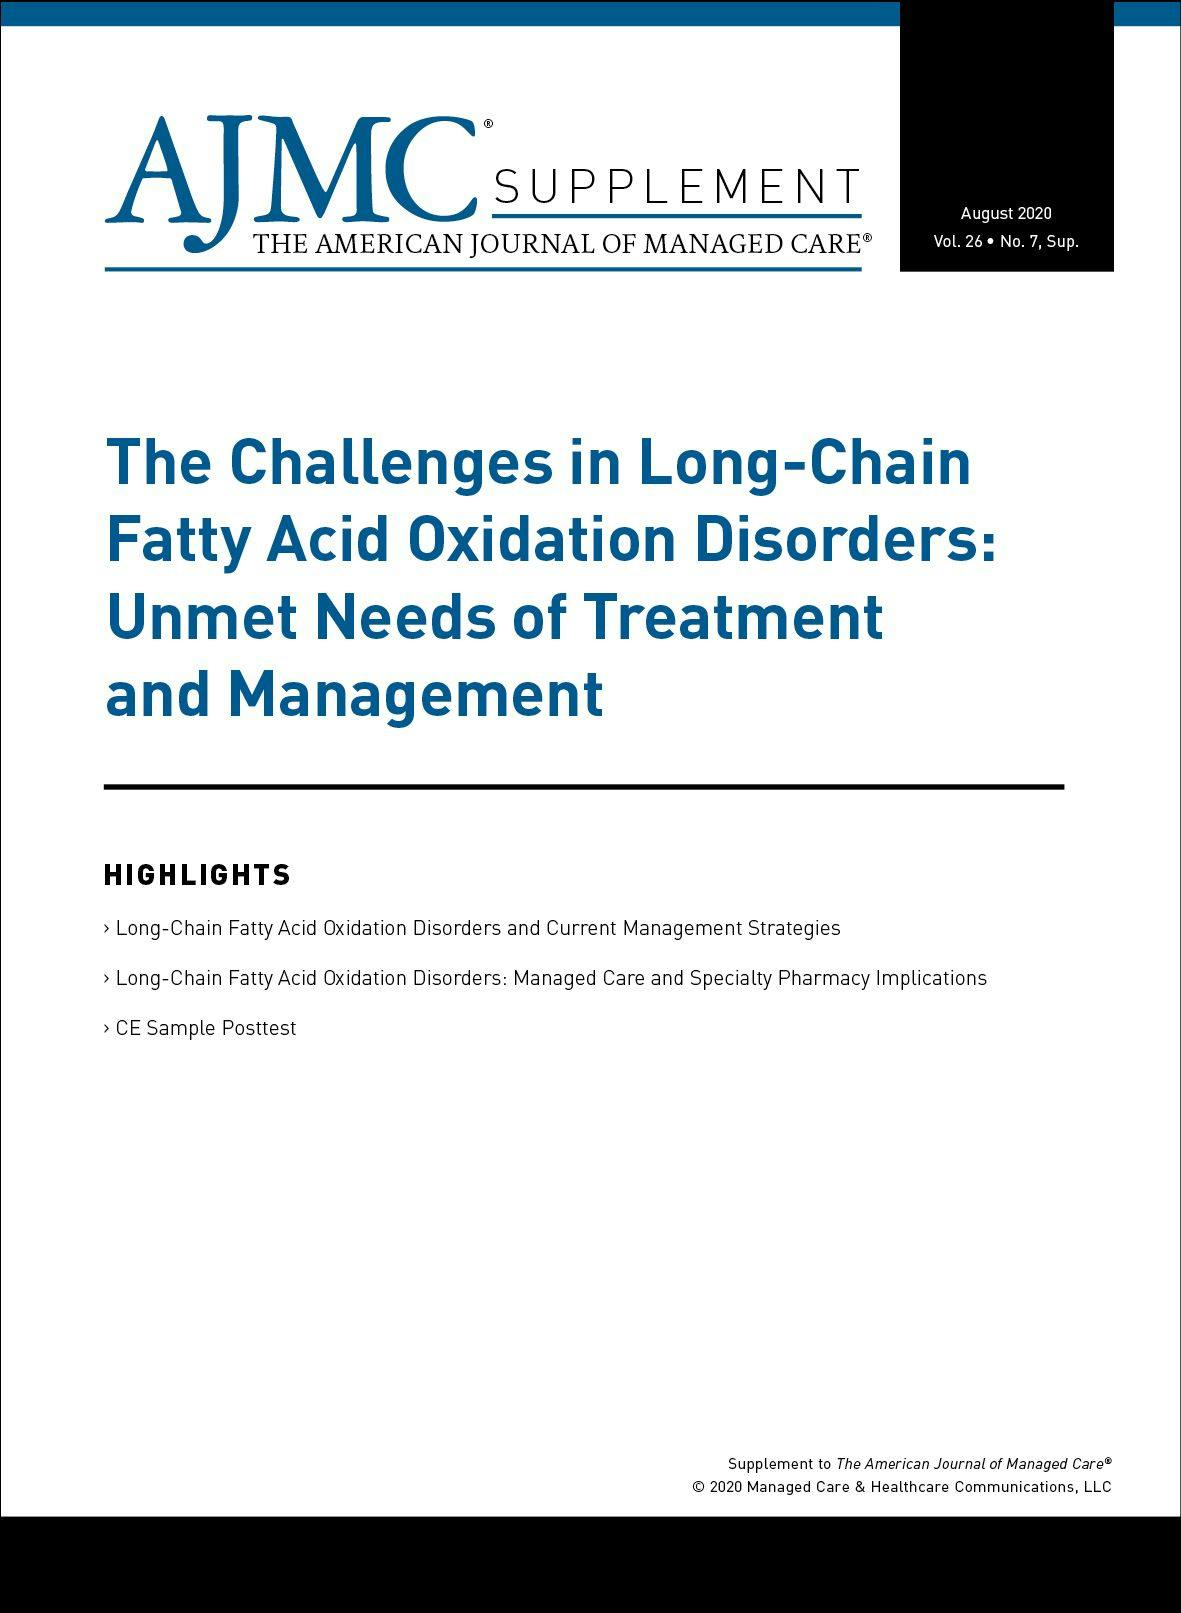 The Challenges in Long-Chain Fatty Acid Oxidation Disorders: Unmet Needs of Treatment and Management